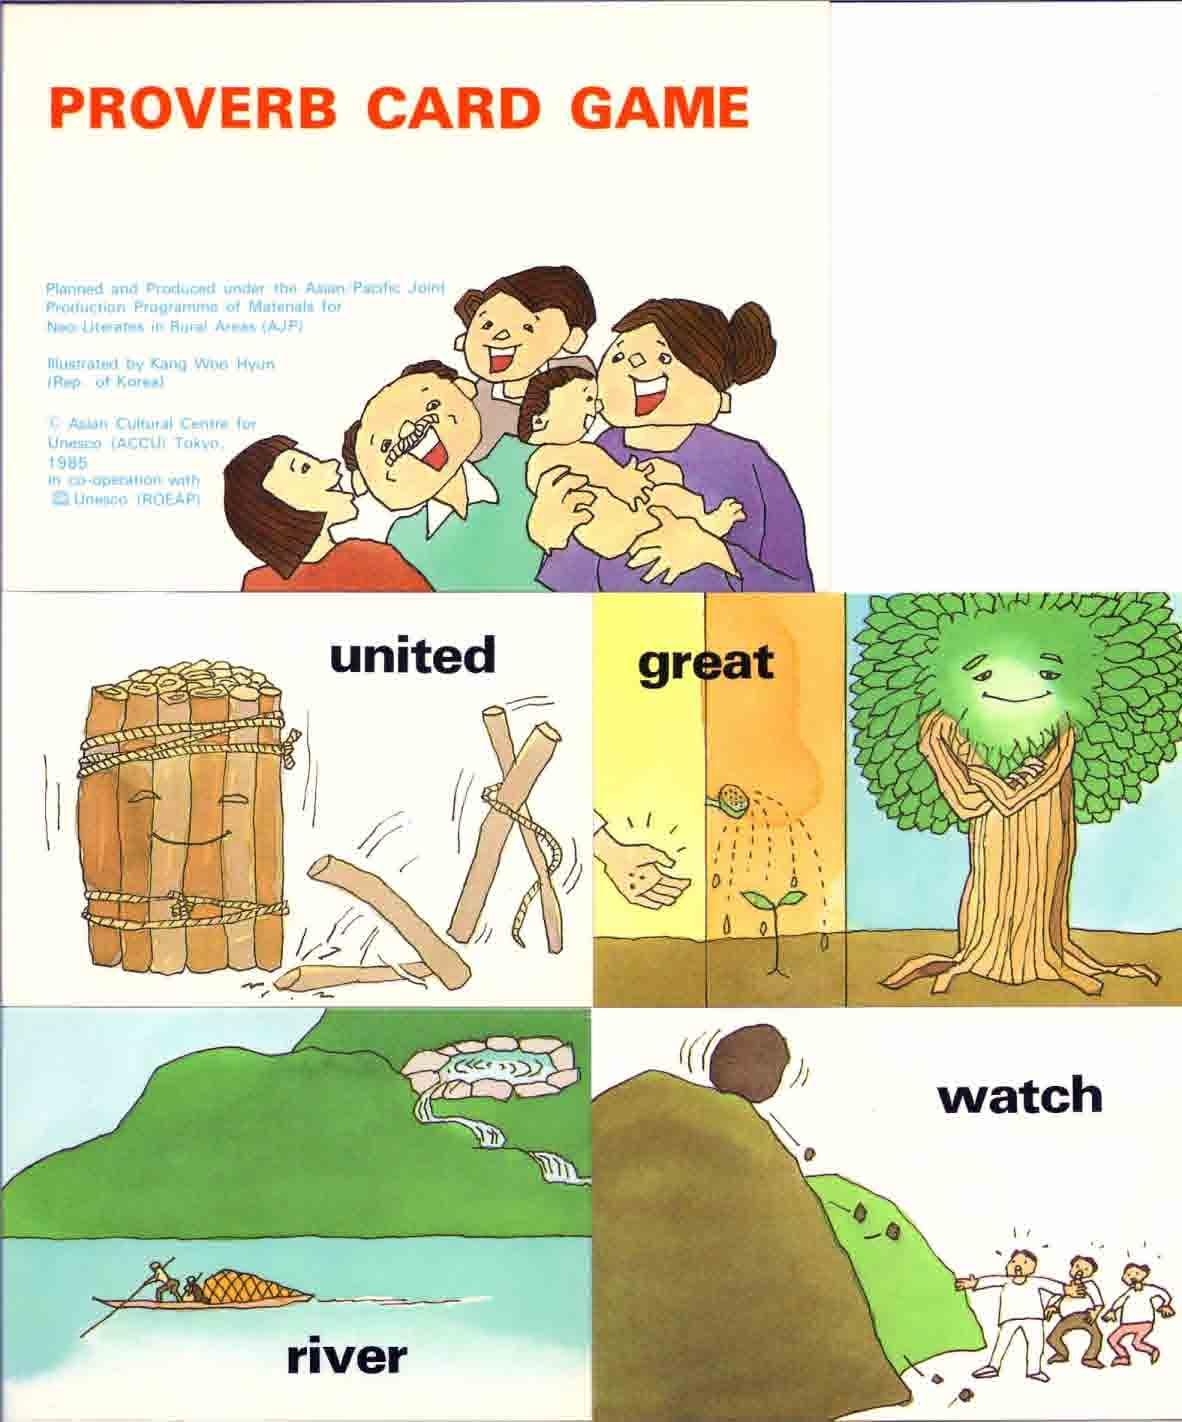 Proverb Card Game